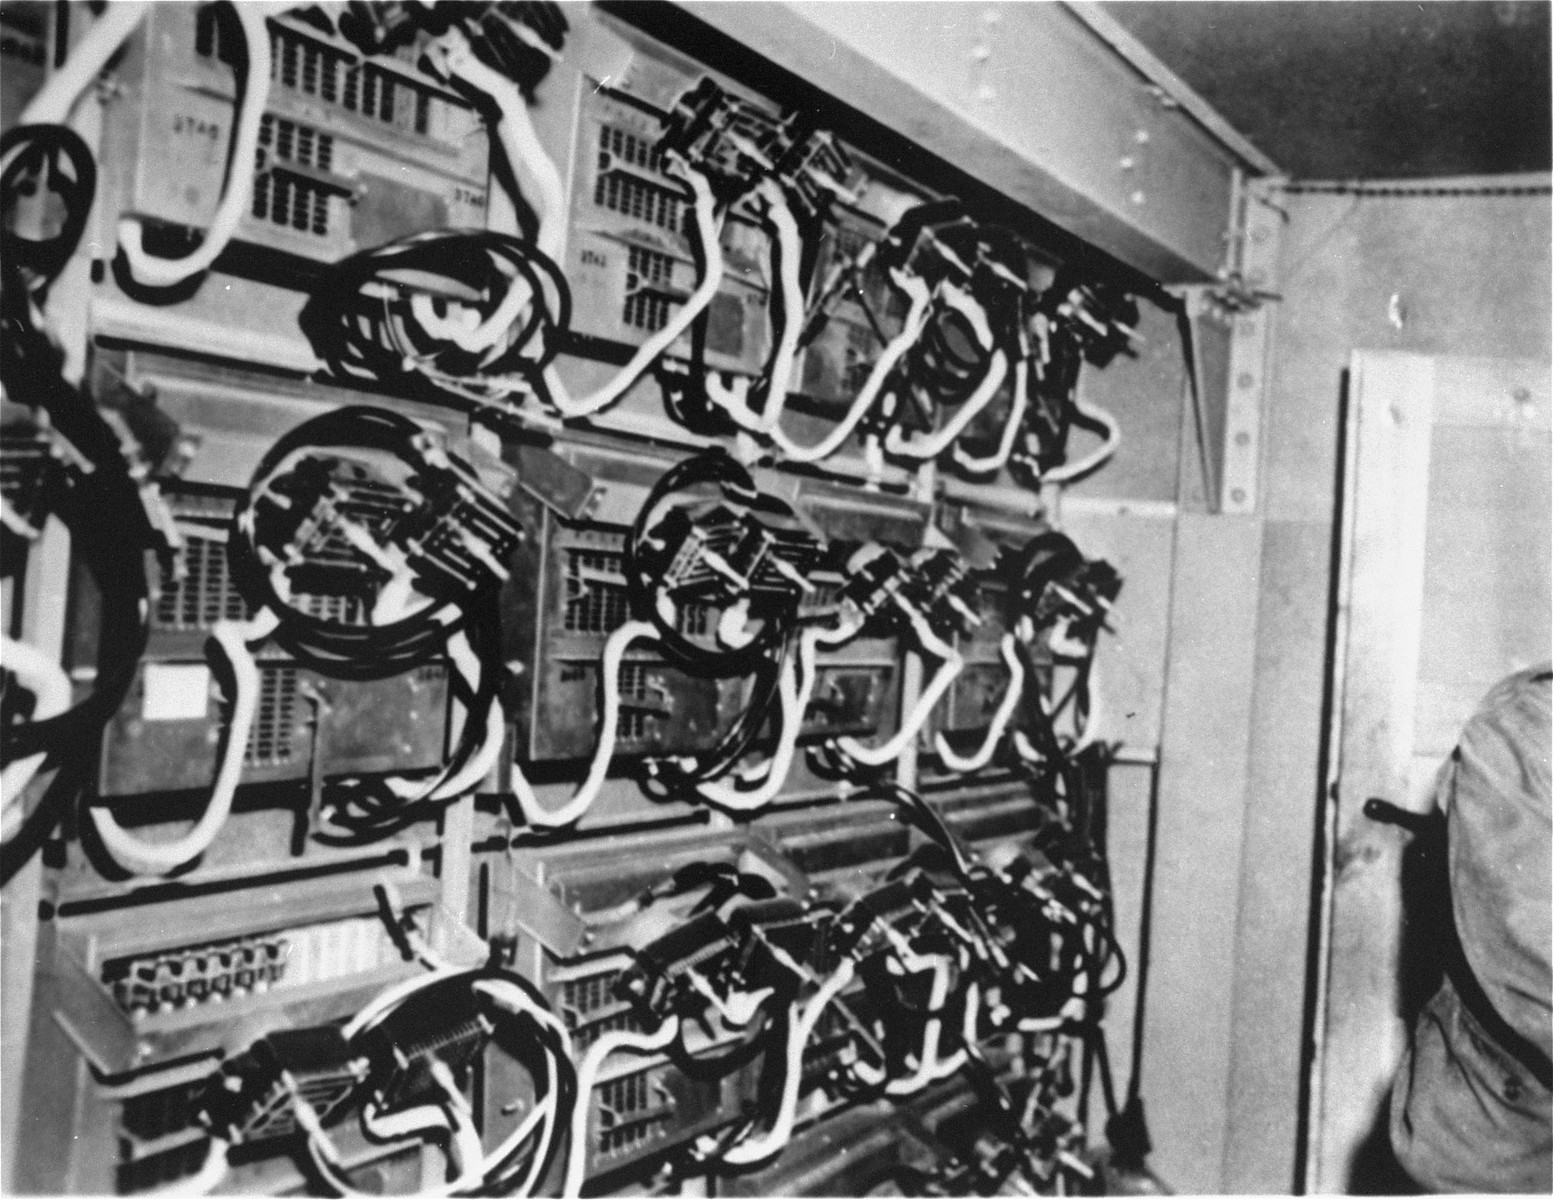 Central junction boxes on a test board in the central test room of the underground factory at Dora-Mittelbau.